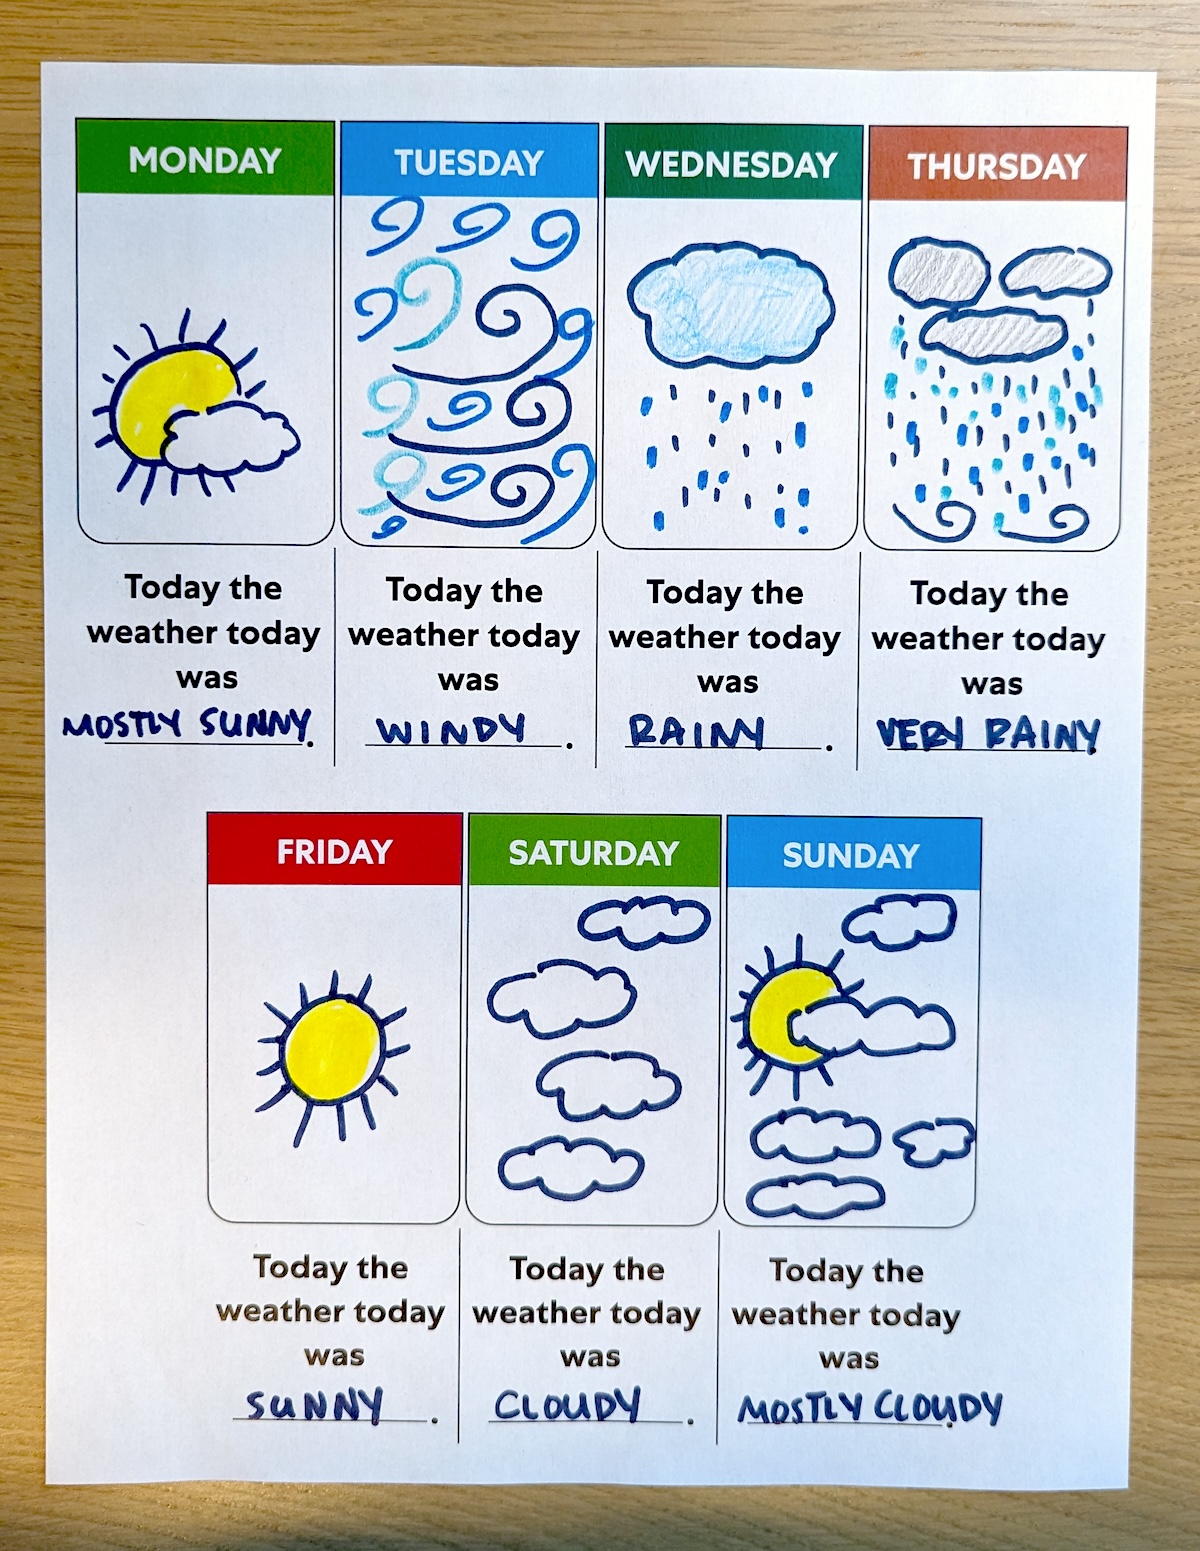 Weather calendar worksheet filled in with descriptions and illustrations for each day: a mostly sunny day, a windy day, a rainy day, a very rainy day, a sunny day, a cloudy day, and a mostly cloudy day.